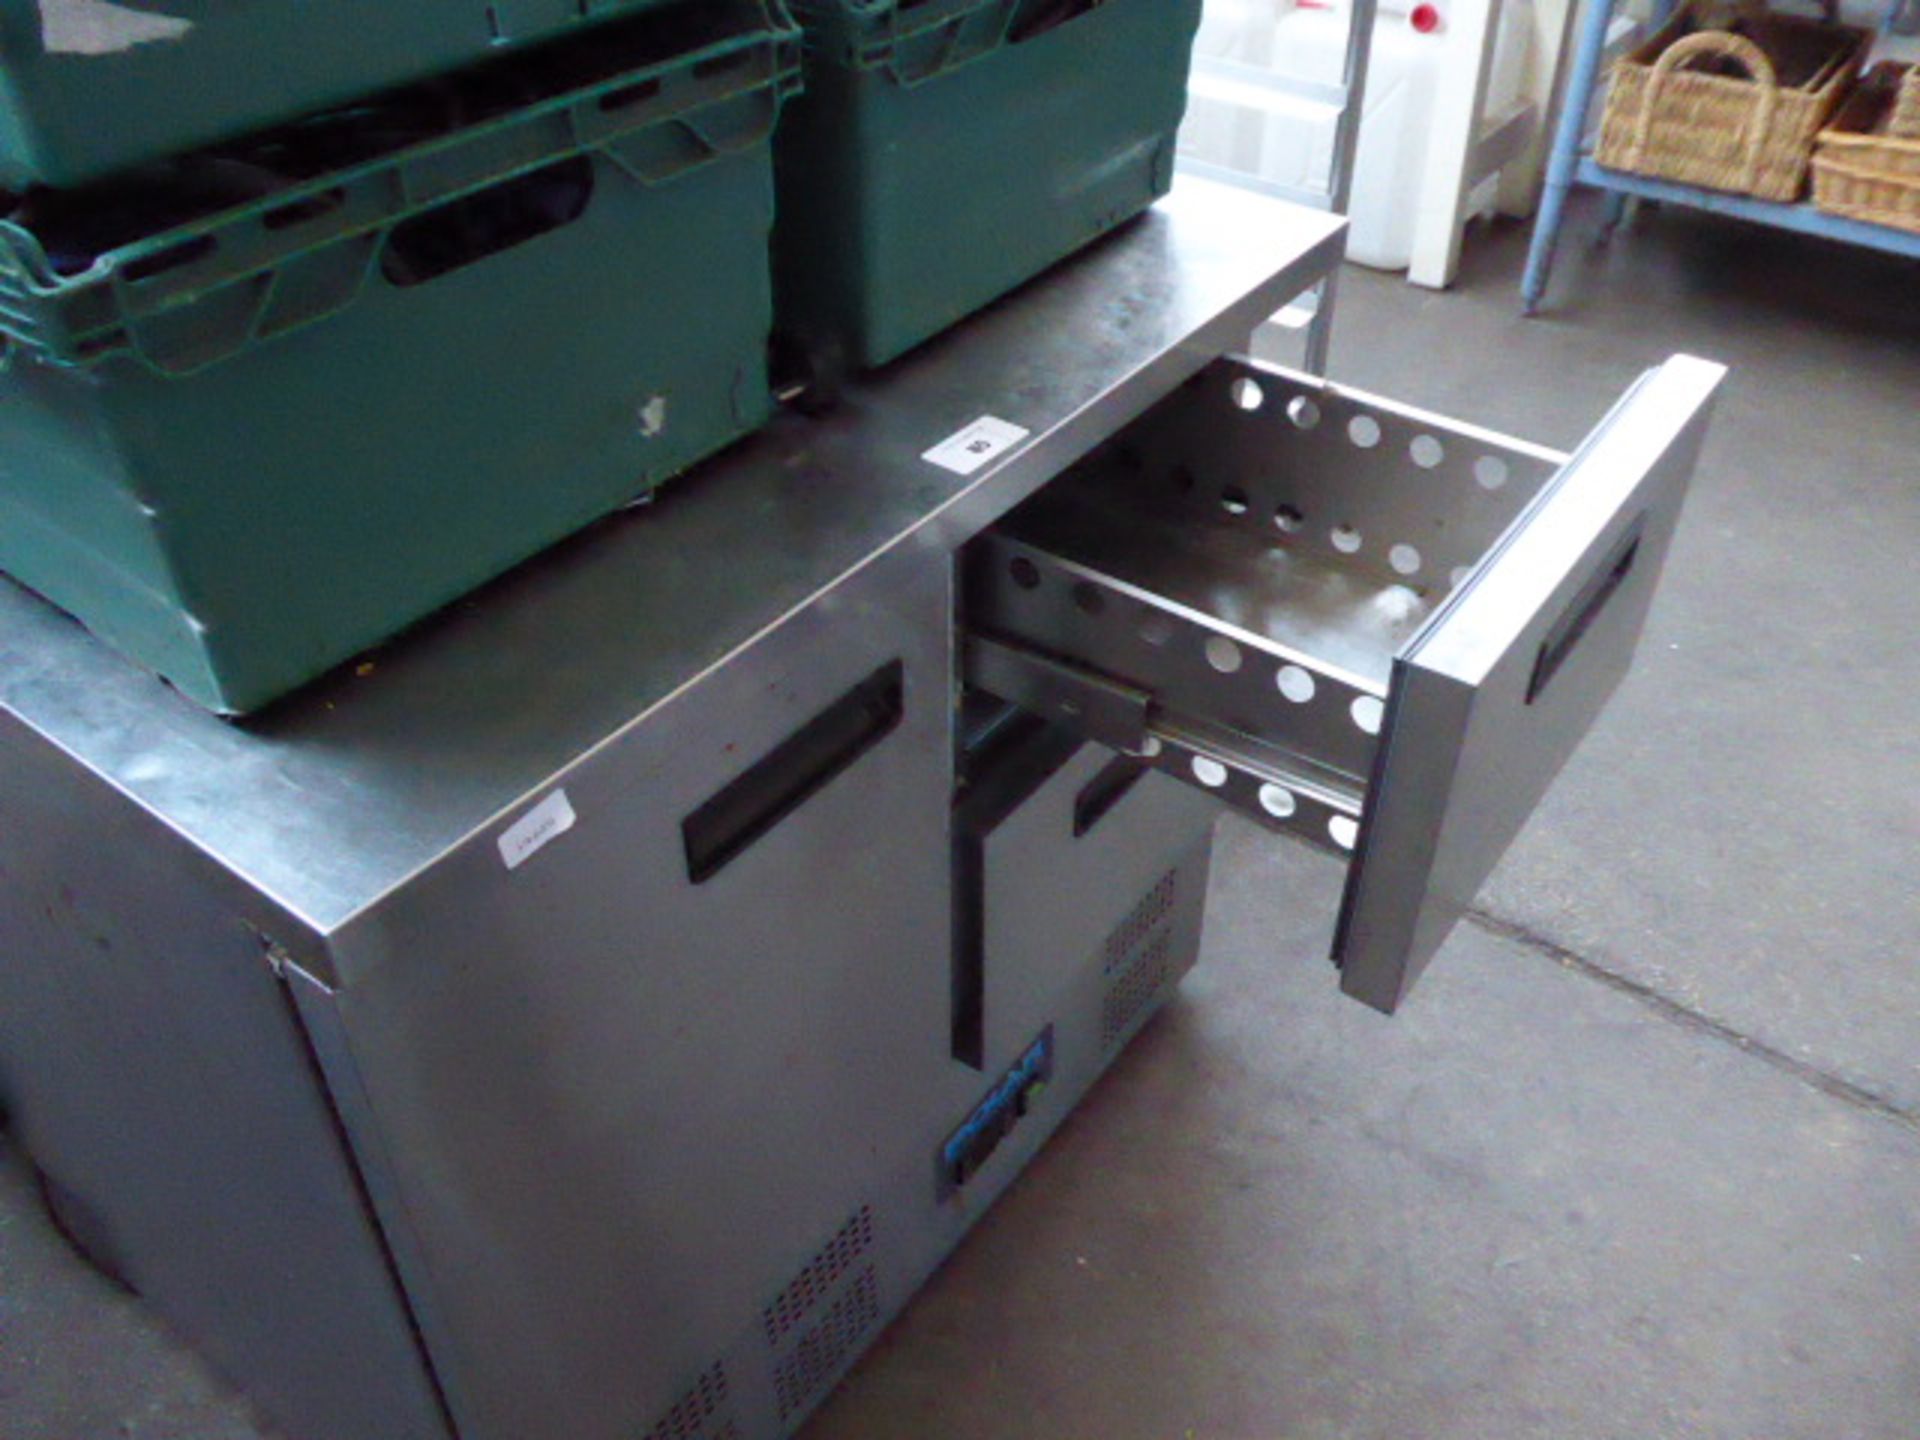 90cm Polar counter fridge with stainless steel prep top, a door and two drawers under (123) - Image 2 of 2